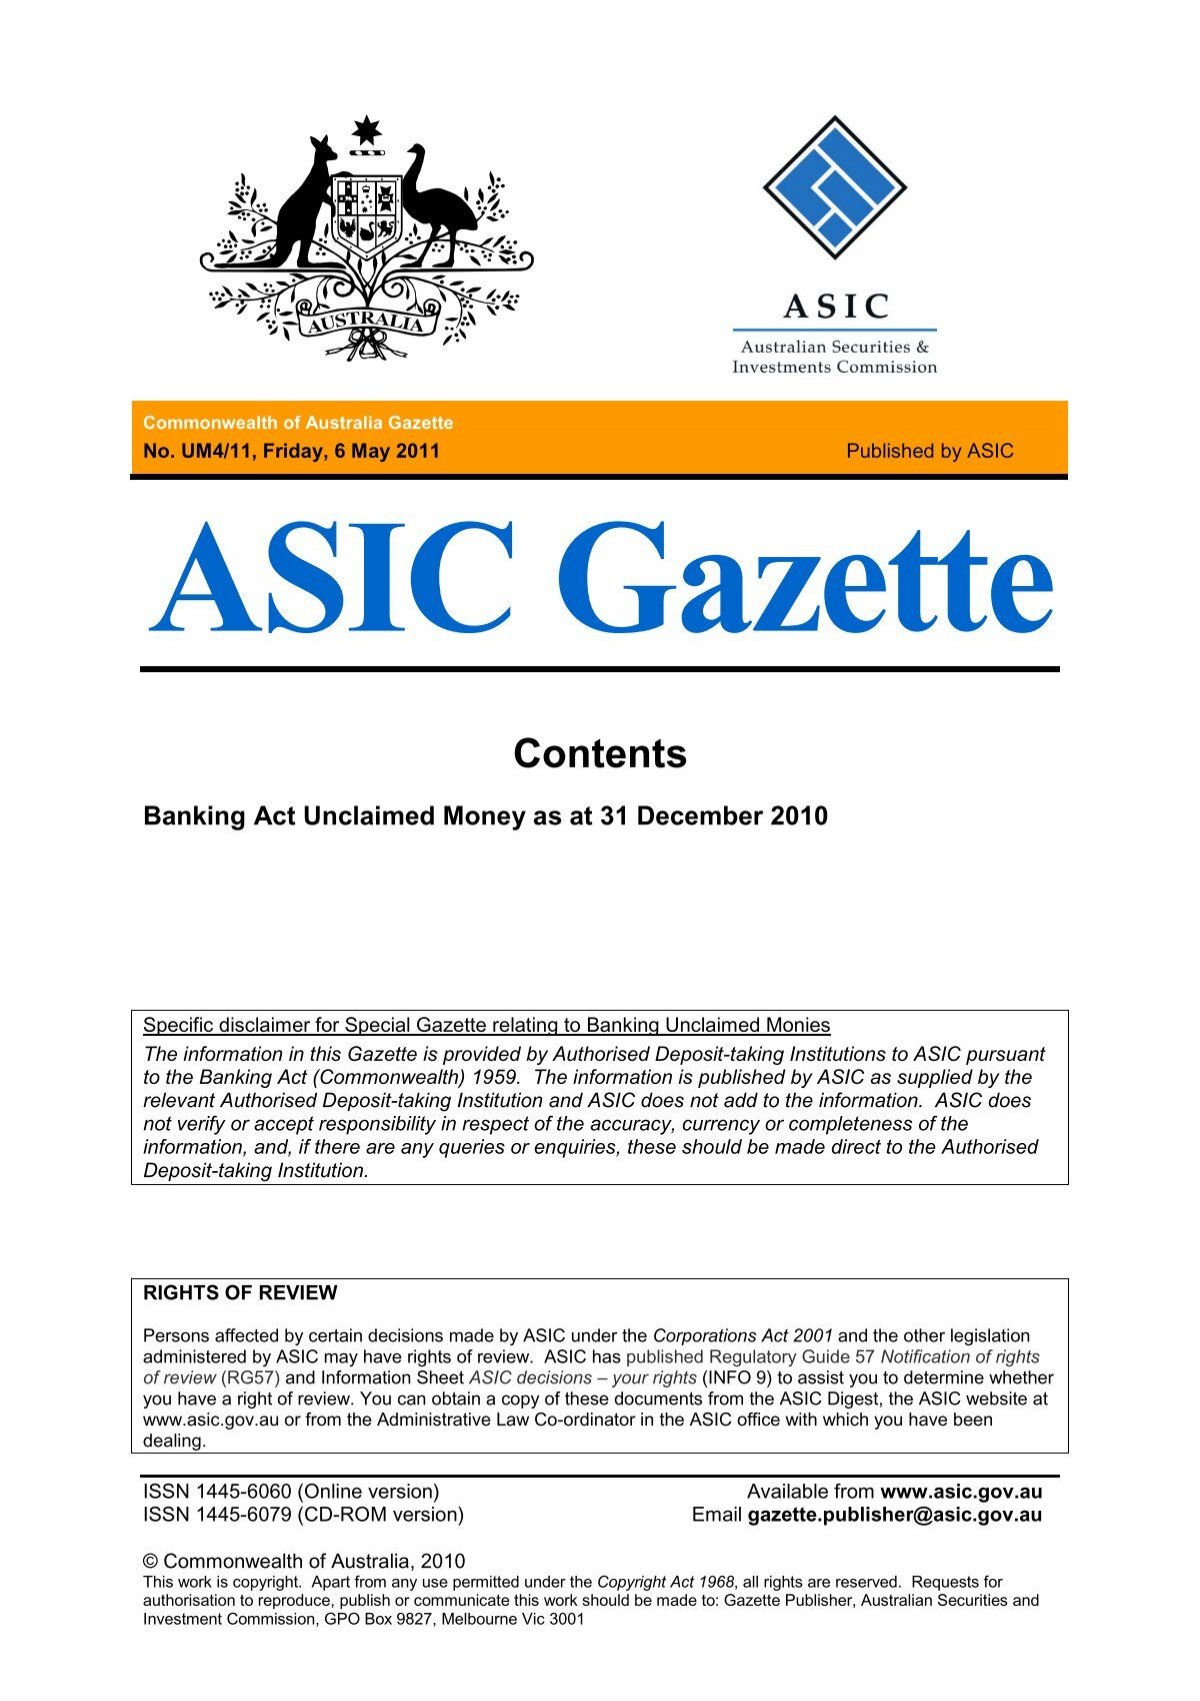 ASIC Gazette - Securities Investments Commission